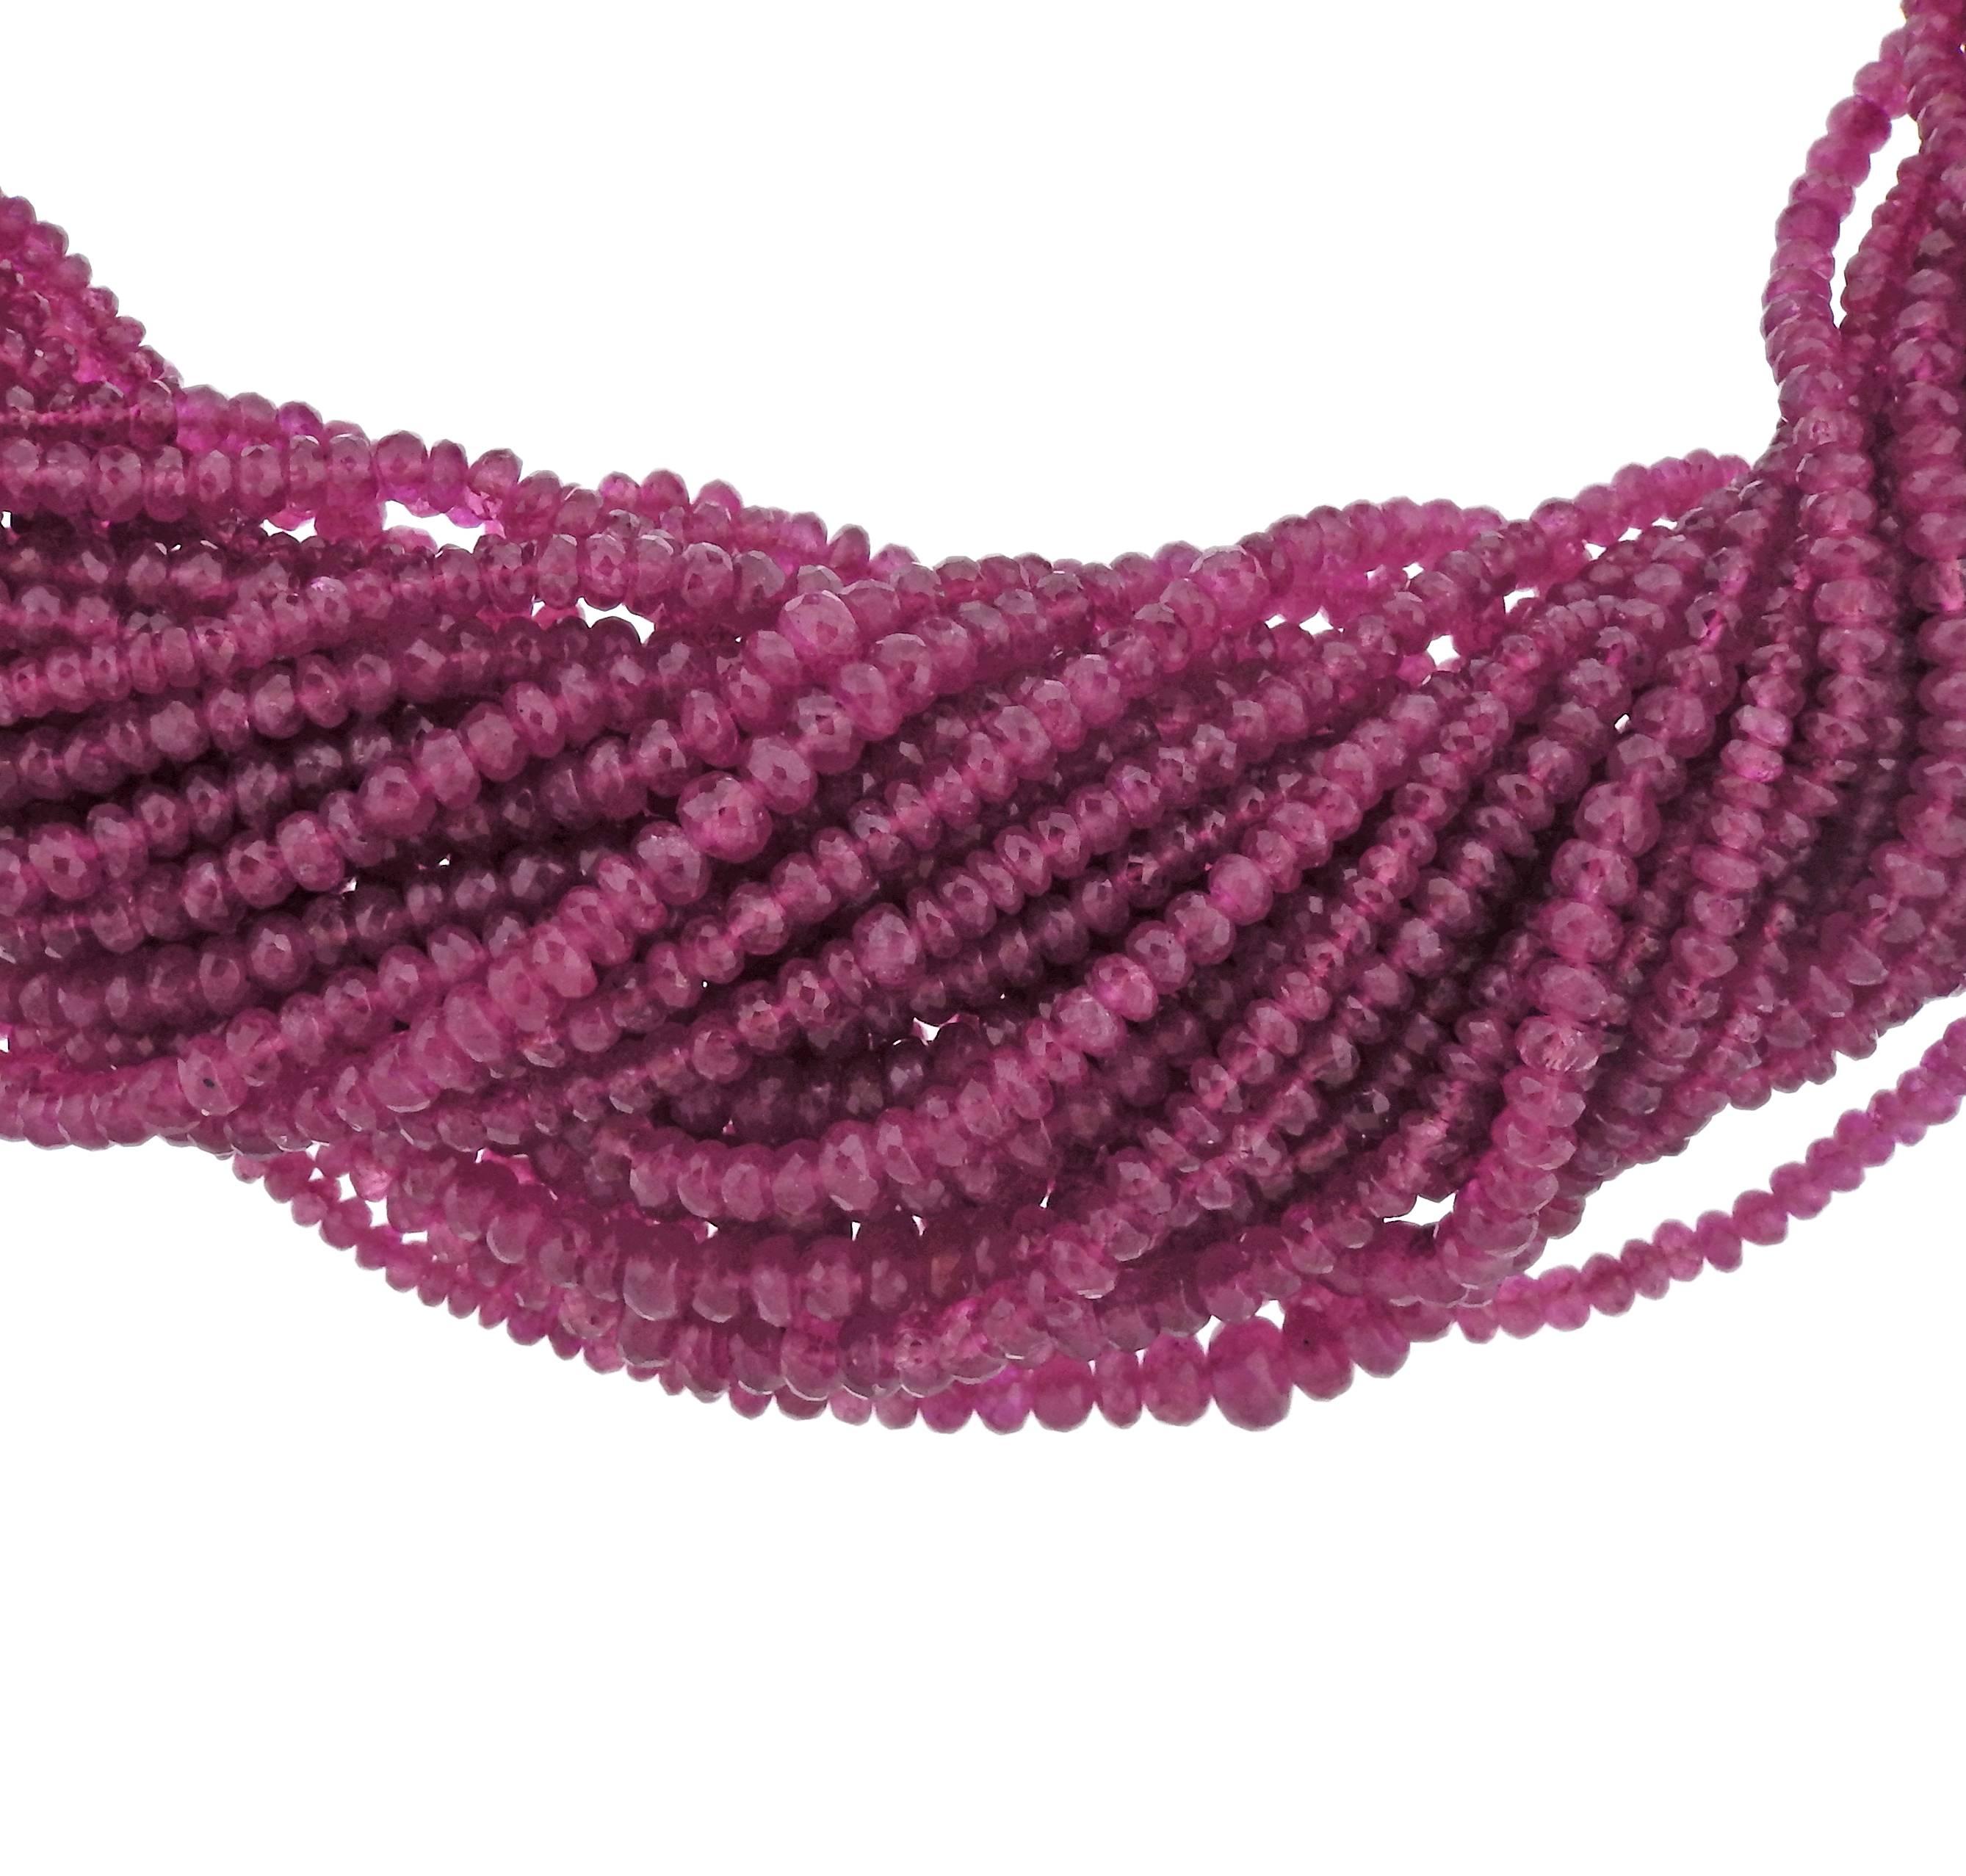 Impressive 18k gold torsade necklace, ceafted by Adria De Haume, featuring multi strands of pink sapphire  , approx. 1400carats !!  diamond decorated clasp. Necklace is approximately 16 1/2 inches long and 35mm wide.  Marked Haume and 750. Weight of